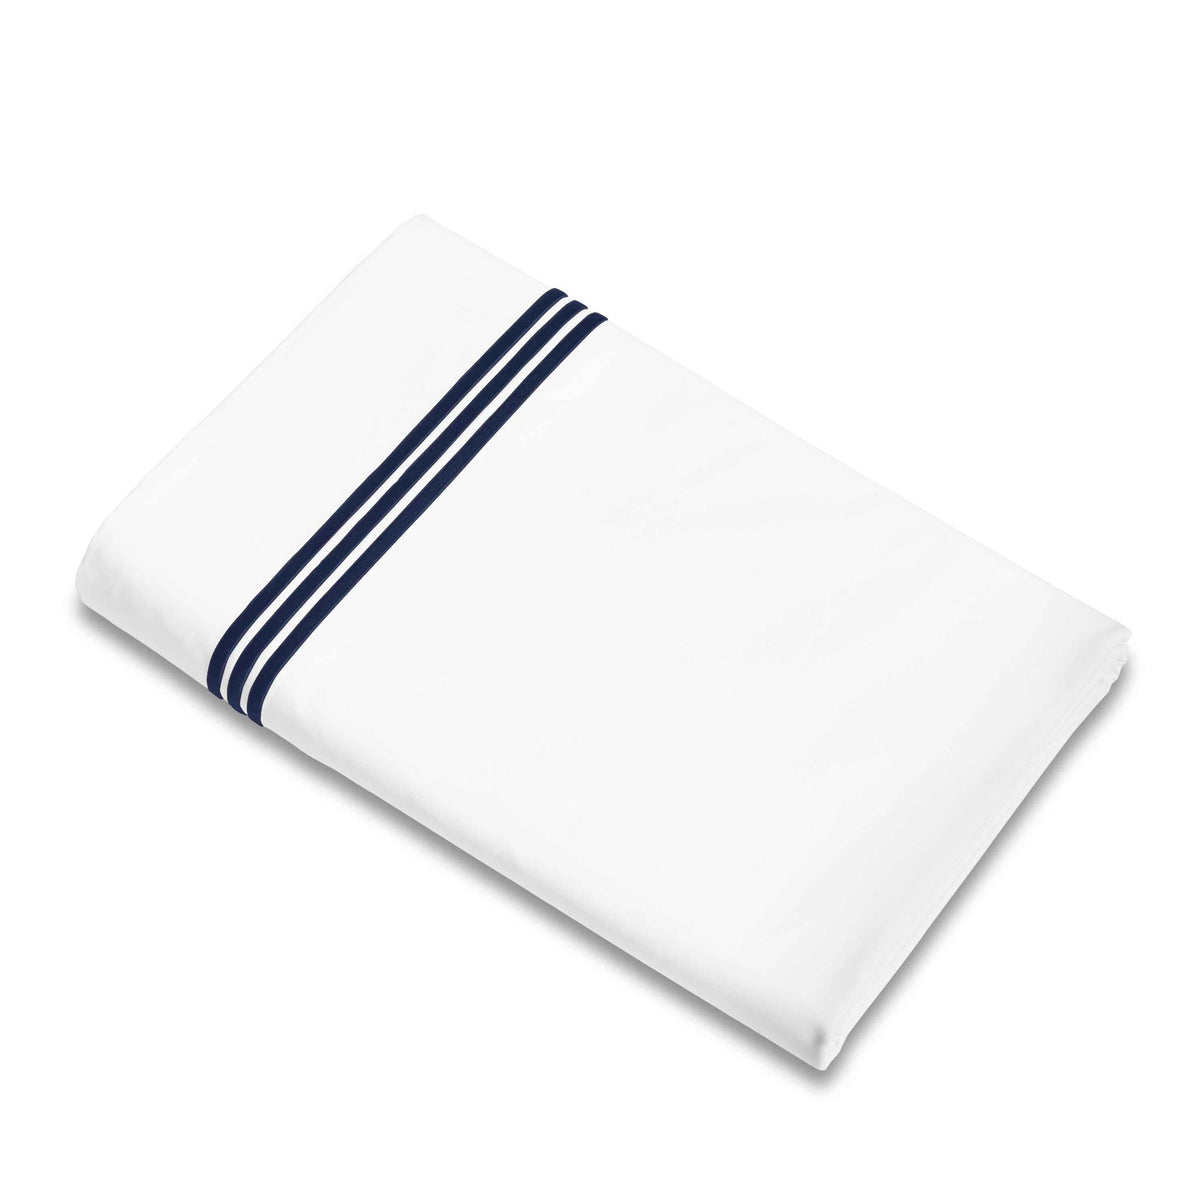 Flat Sheet of Signoria Platinum Percale Bedding in White/Midnight Blue Color